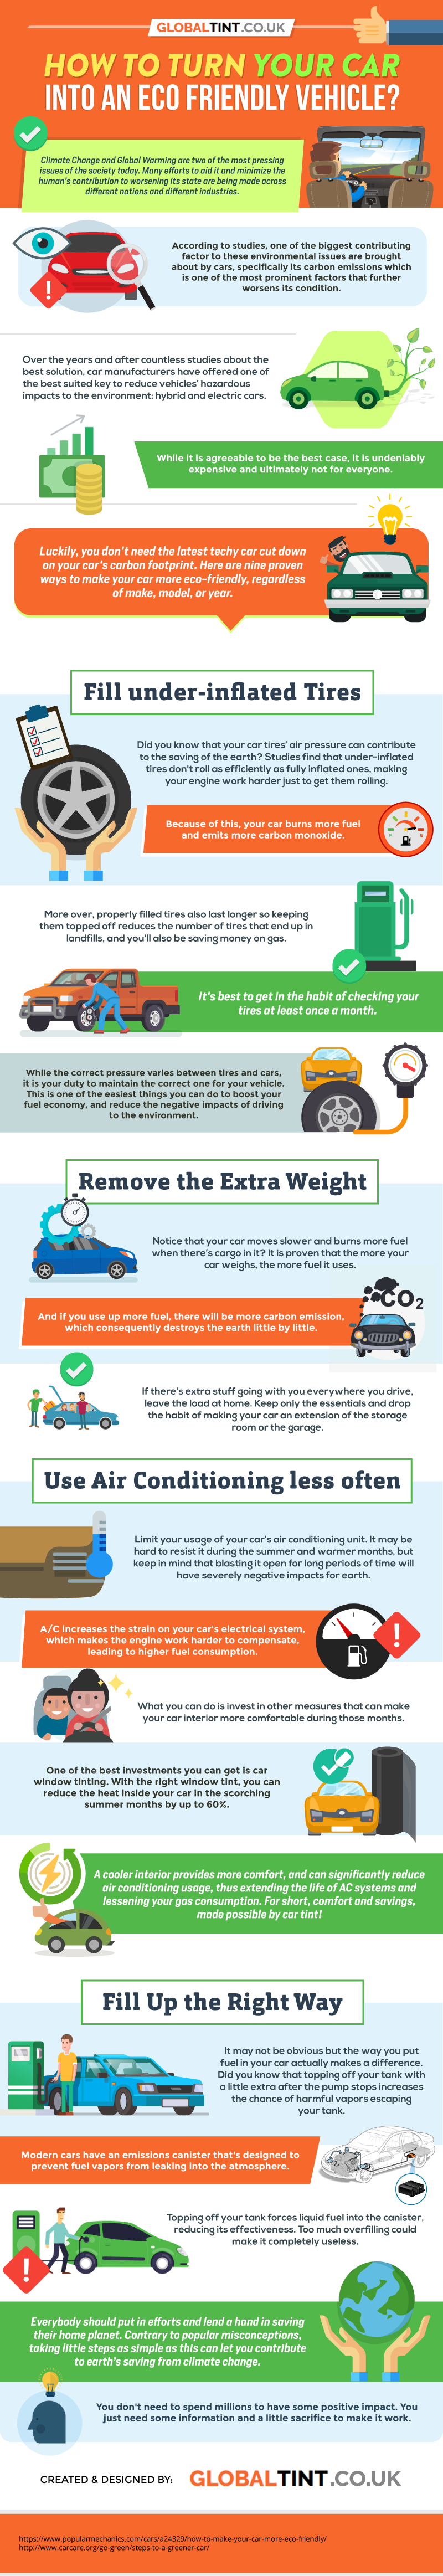 eco friendly cars infographic